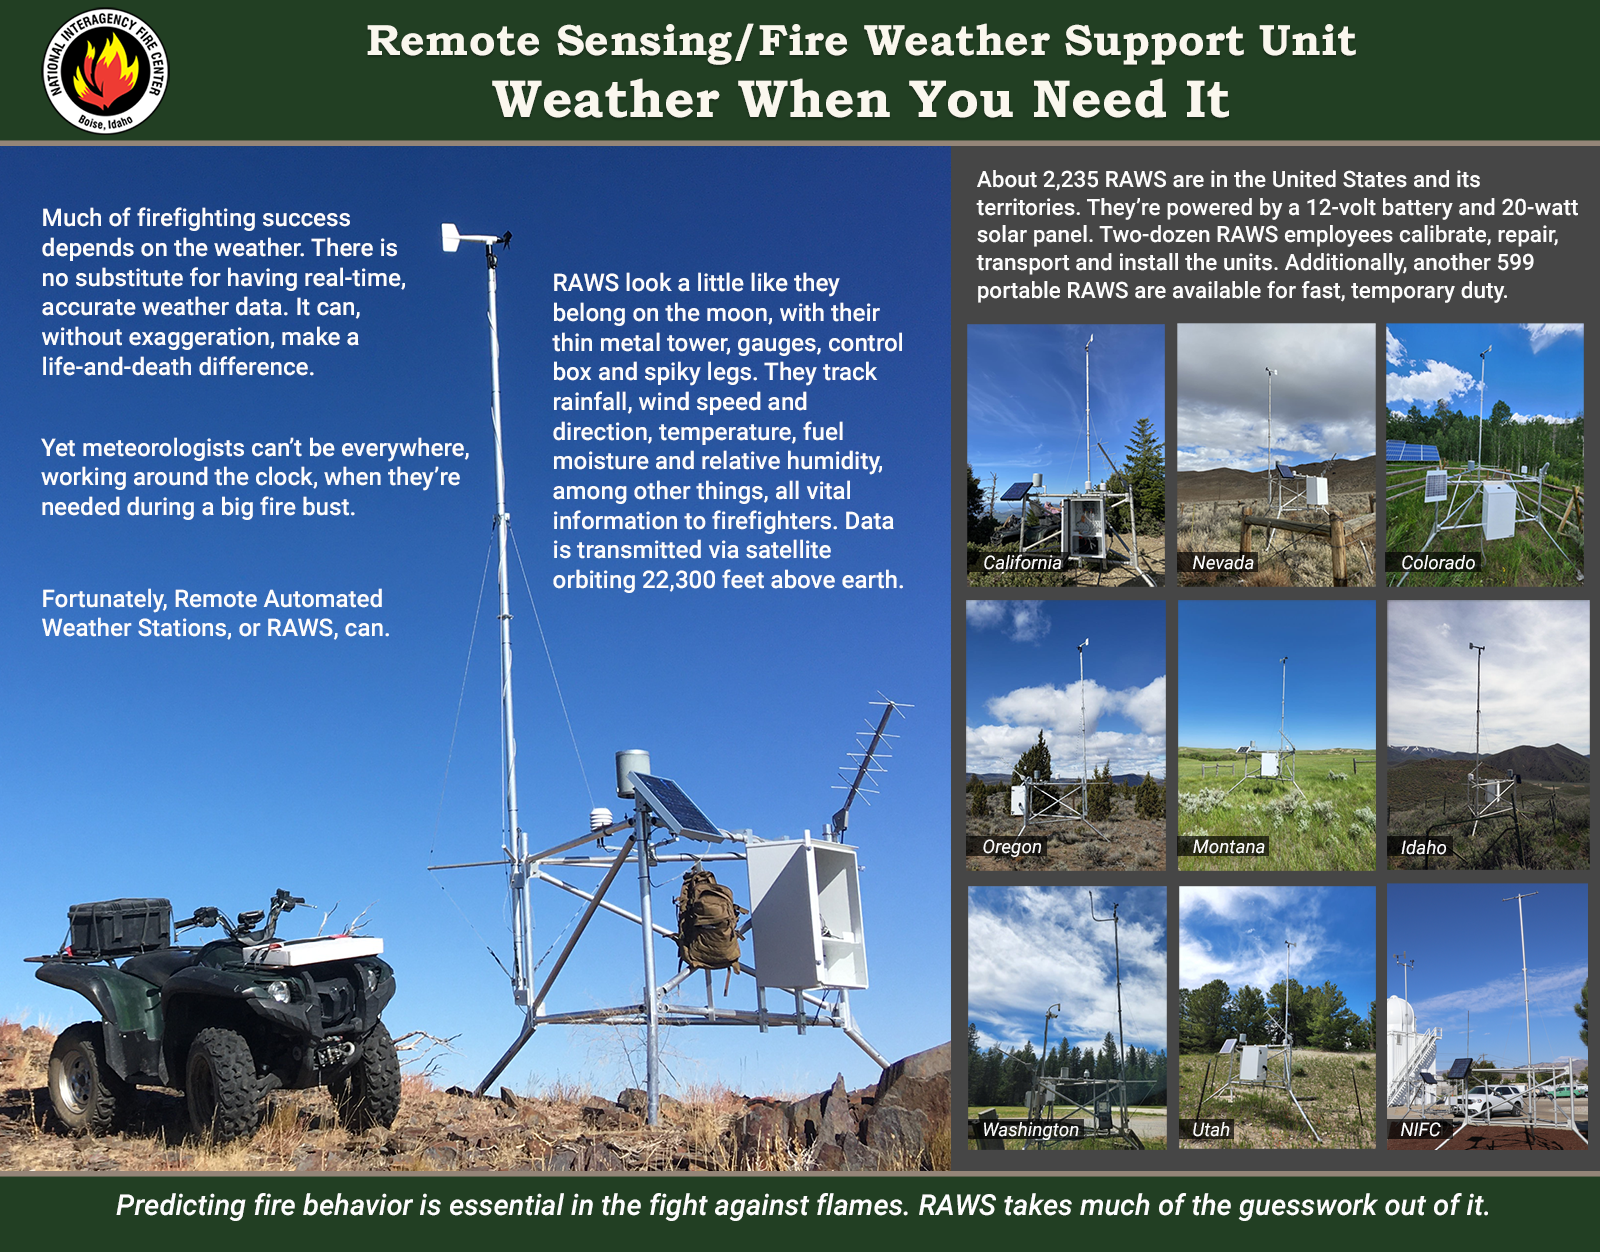 Interpretive Sign titled "Remote Sensing/Fire Weather Support Unit: Weather When You Need It"